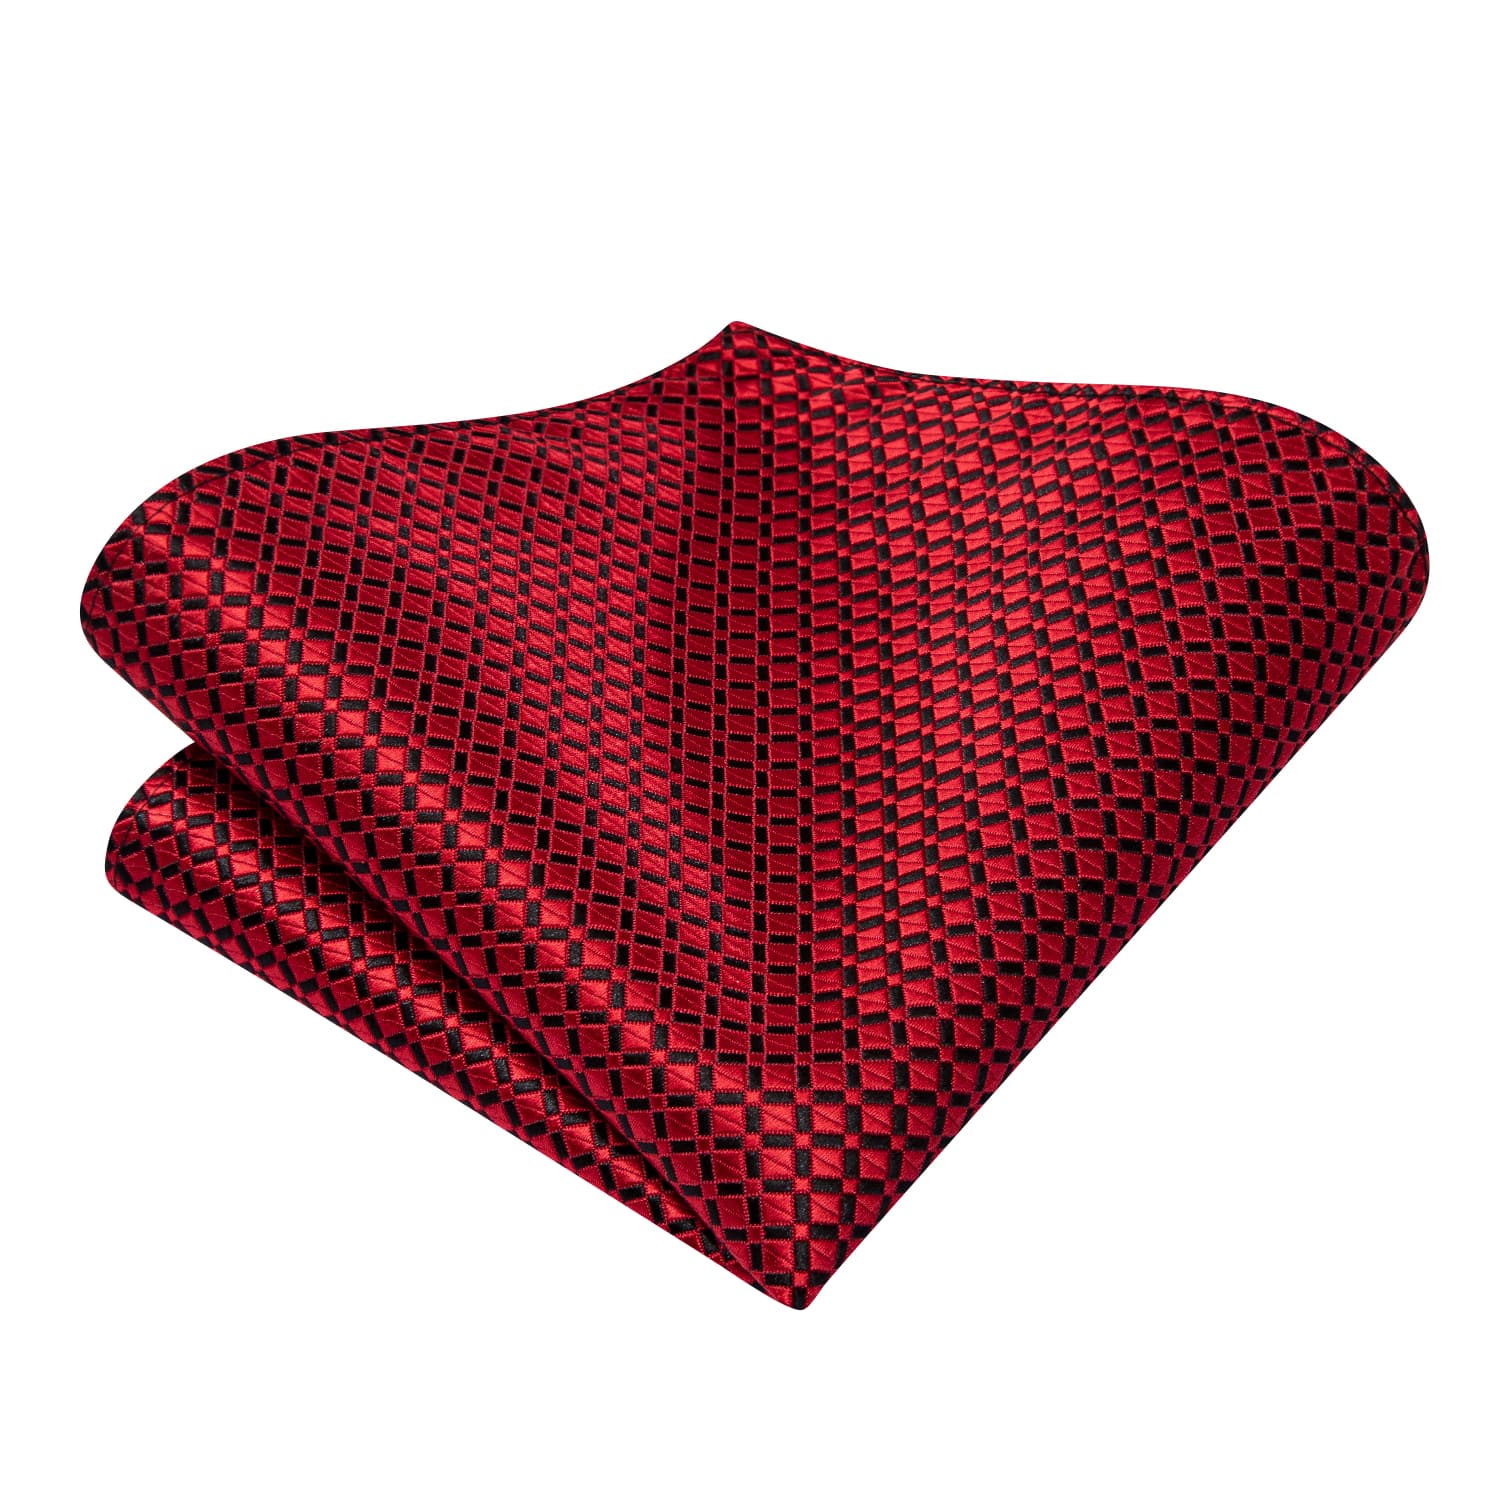 Pocket square for red self tie bow tie